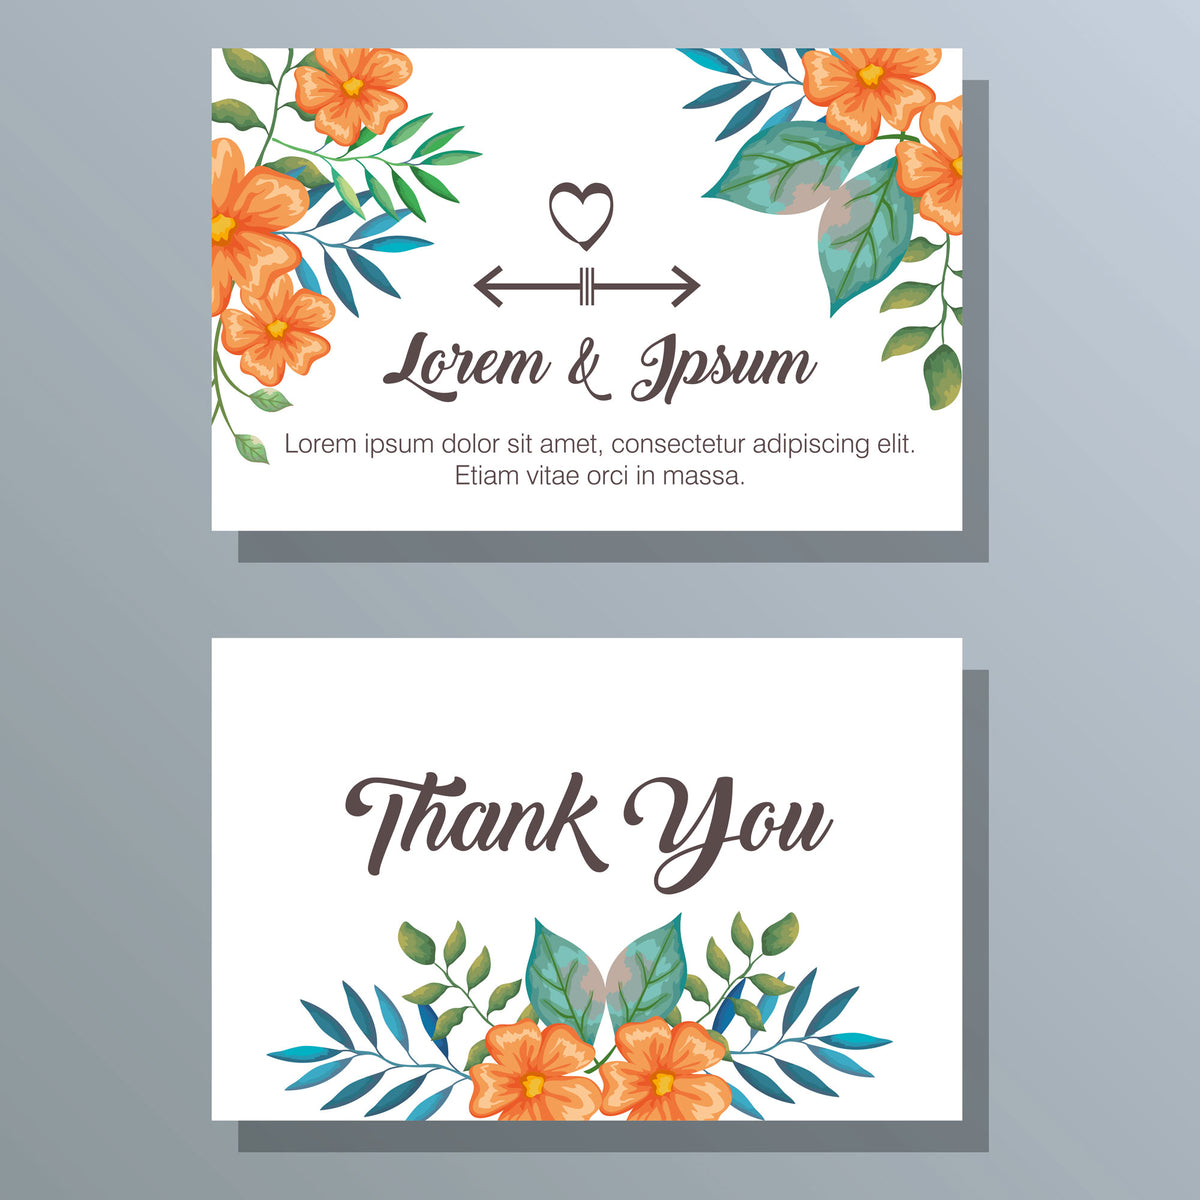 Plantable Flower & Leaves Thank You Cards - Set of 100